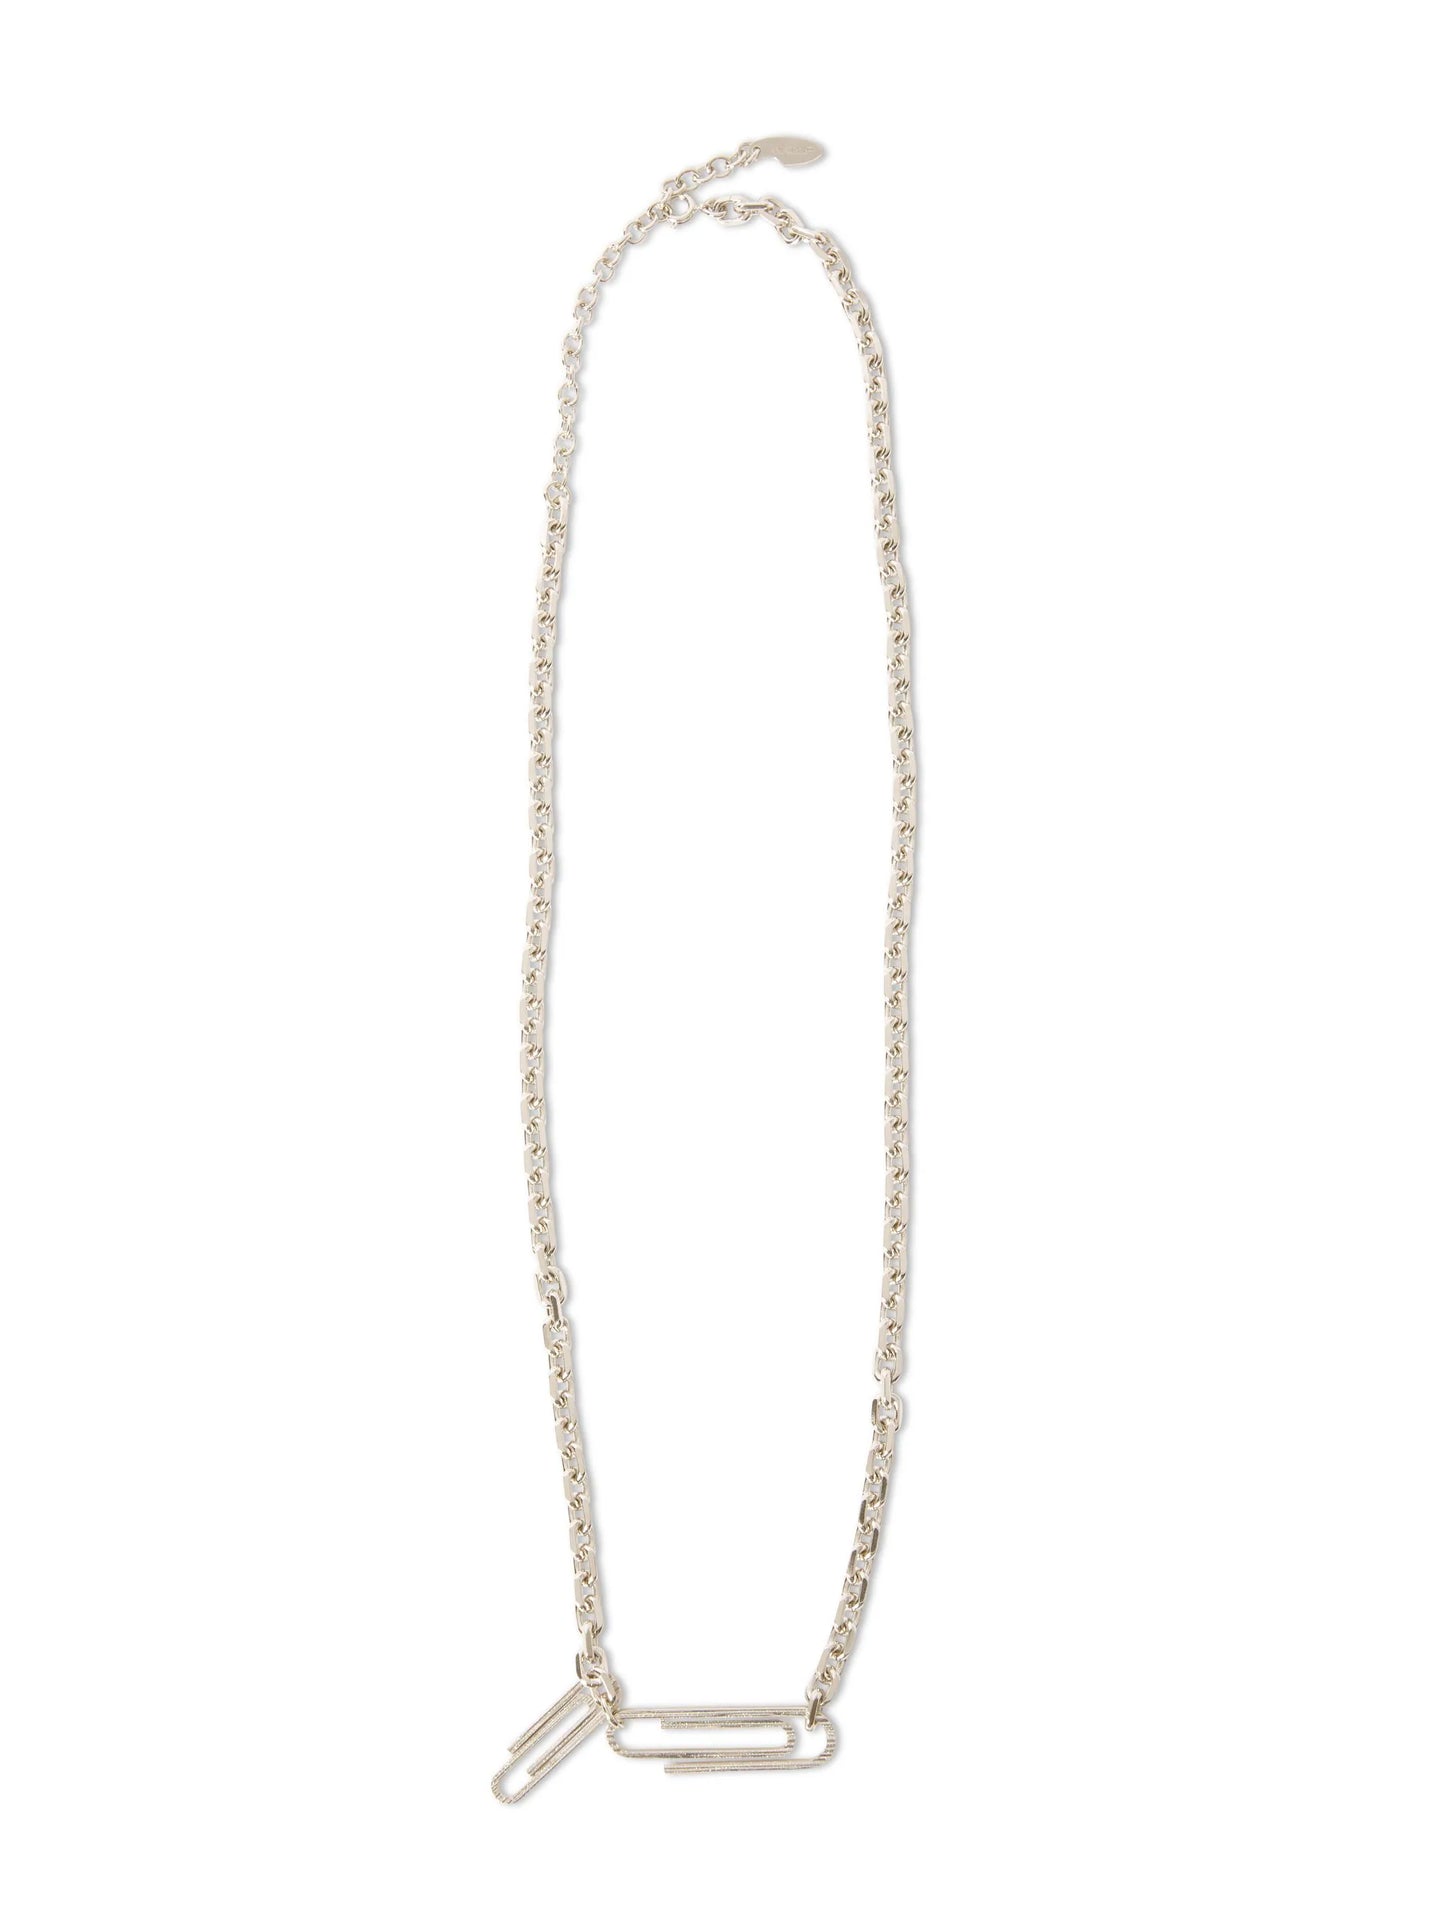 OFF-WHITE TEXTURE SILVER PAPERCLIP NECKLACE